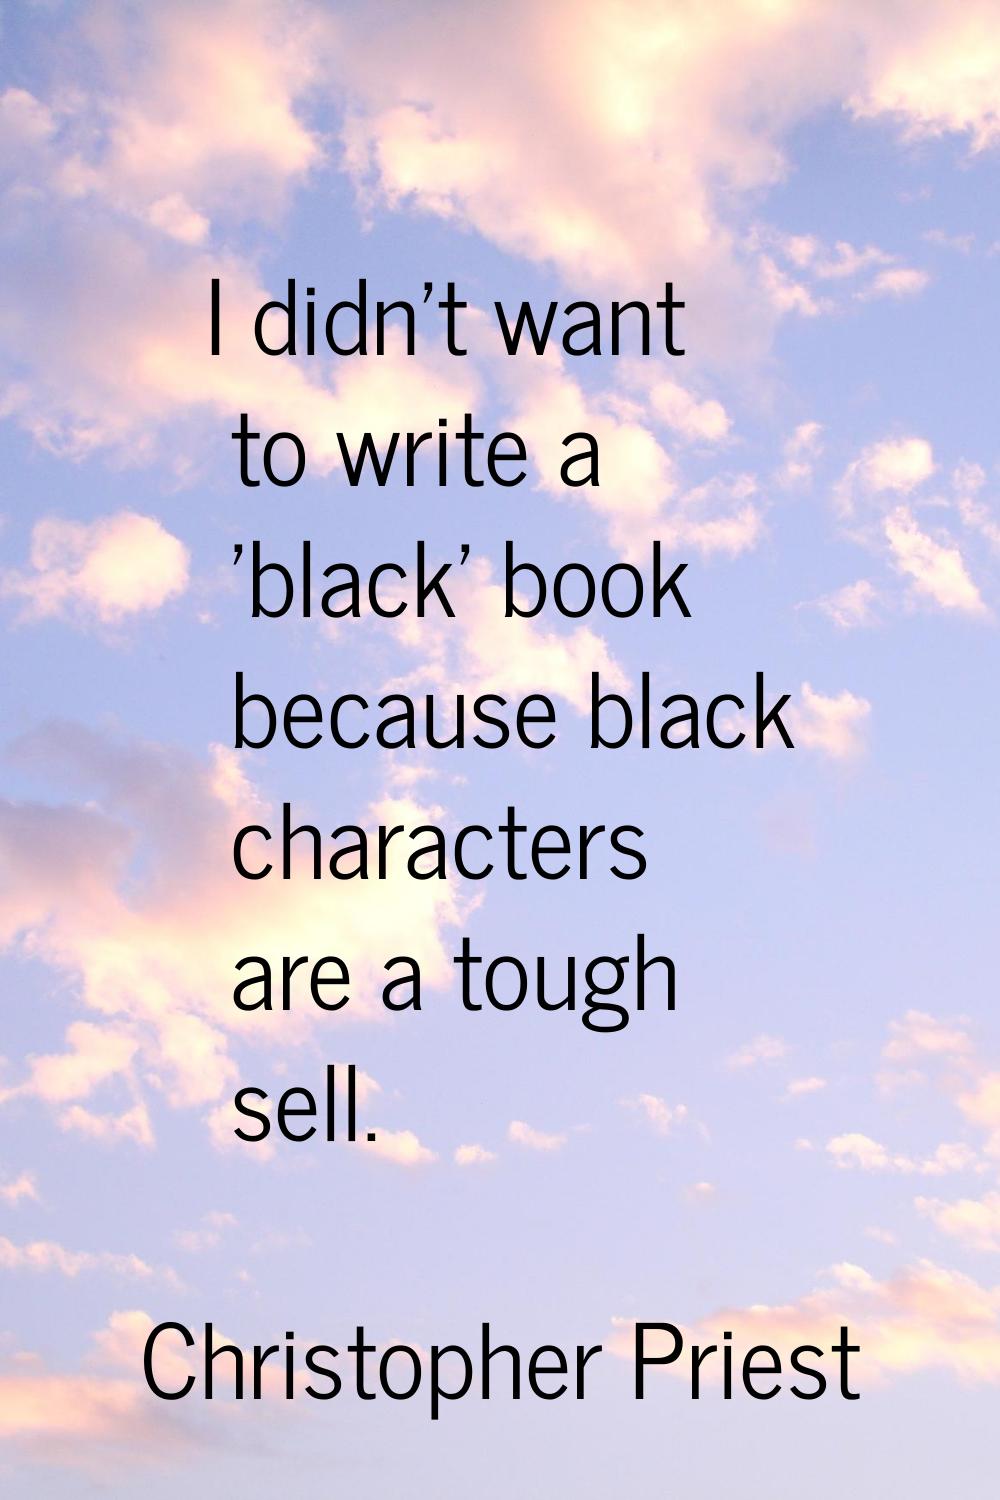 I didn't want to write a 'black' book because black characters are a tough sell.